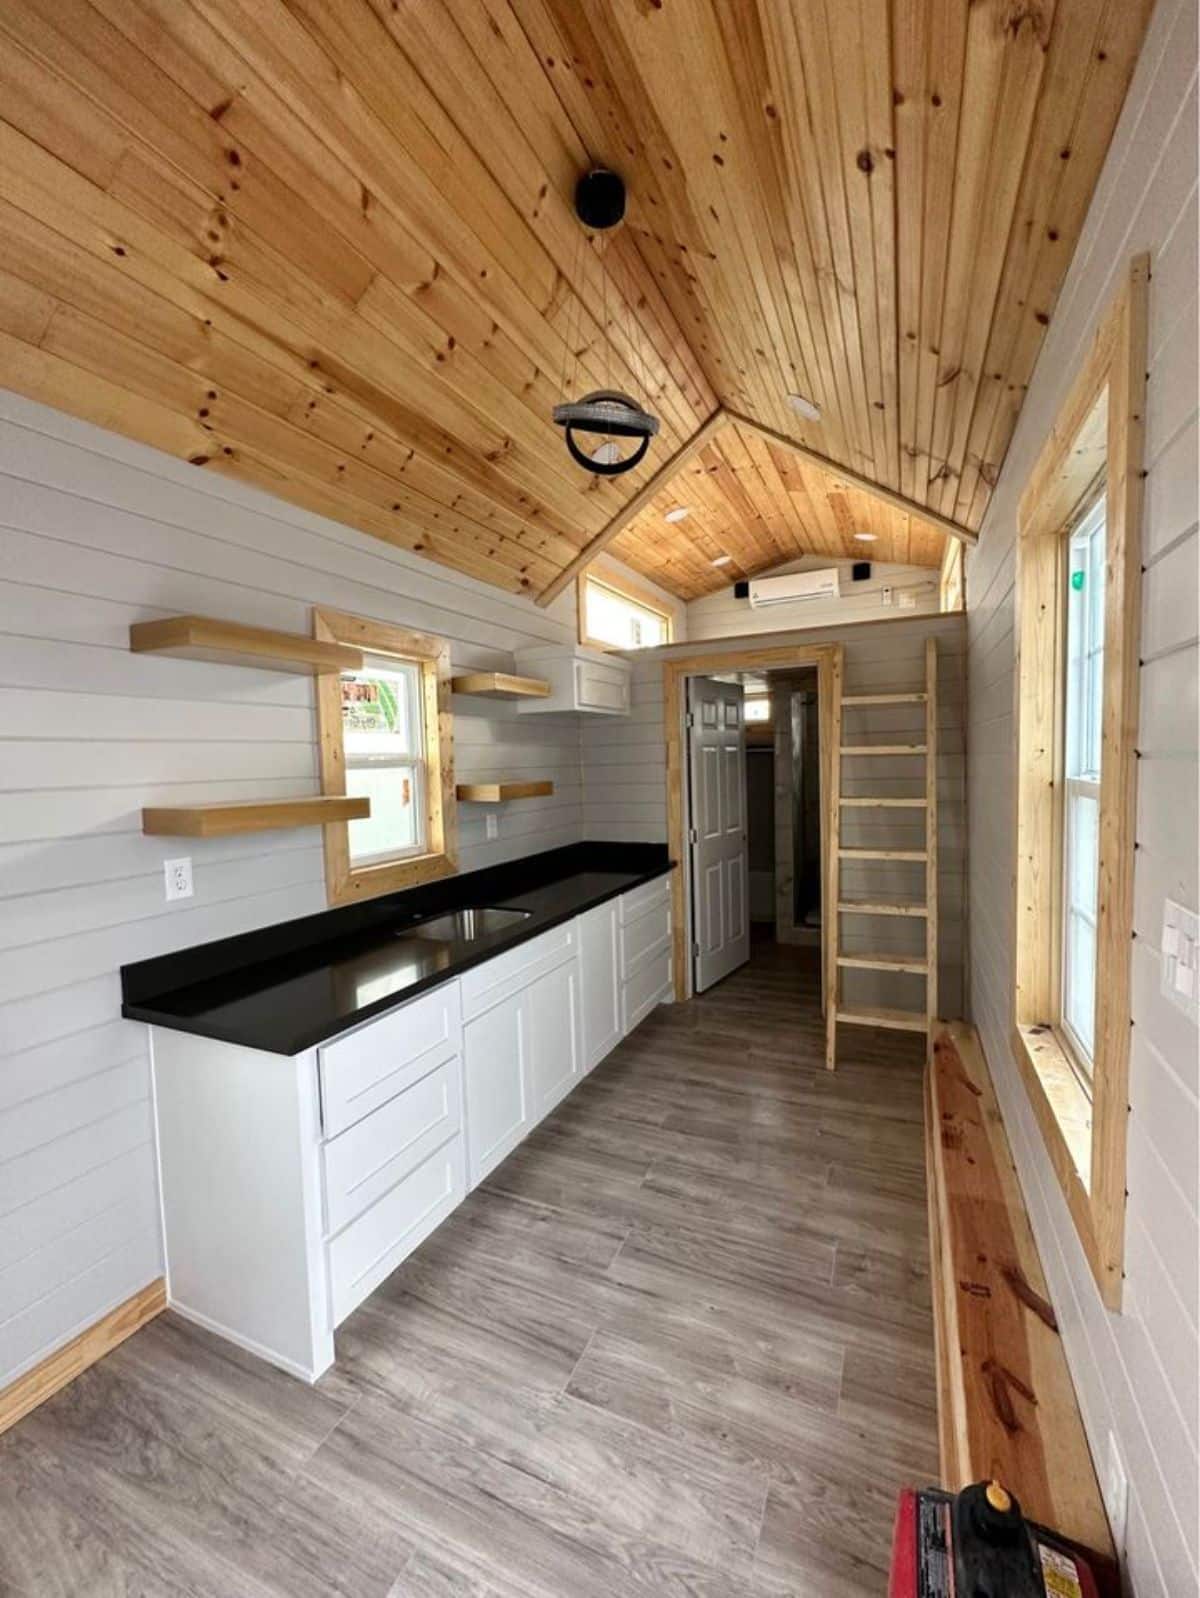 Kitchen area of 24’ tiny home